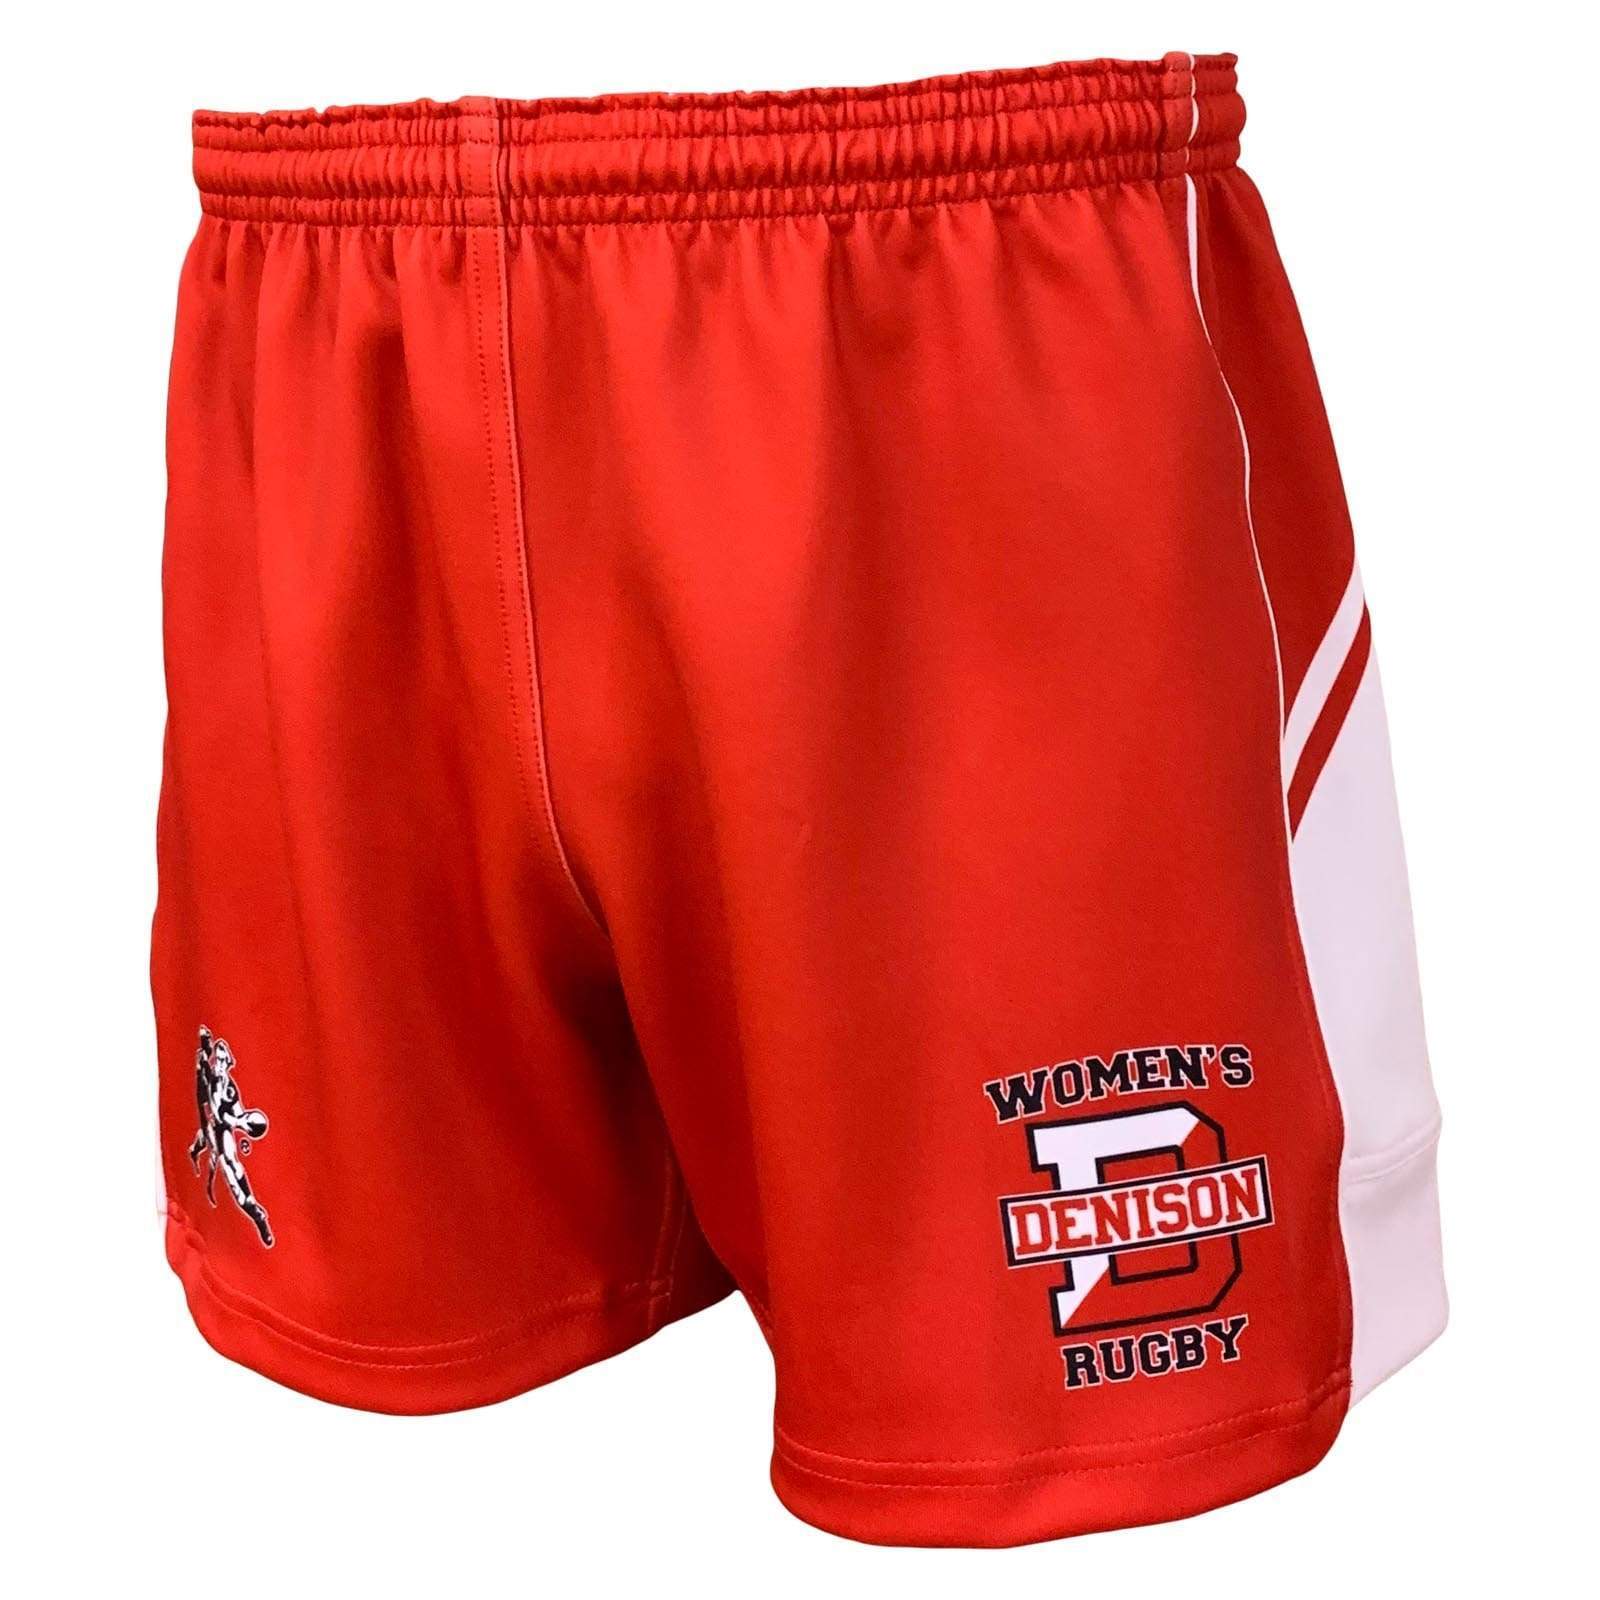 Get latest Men's Custom Sublimated Performance Fit (Tight) Rugby